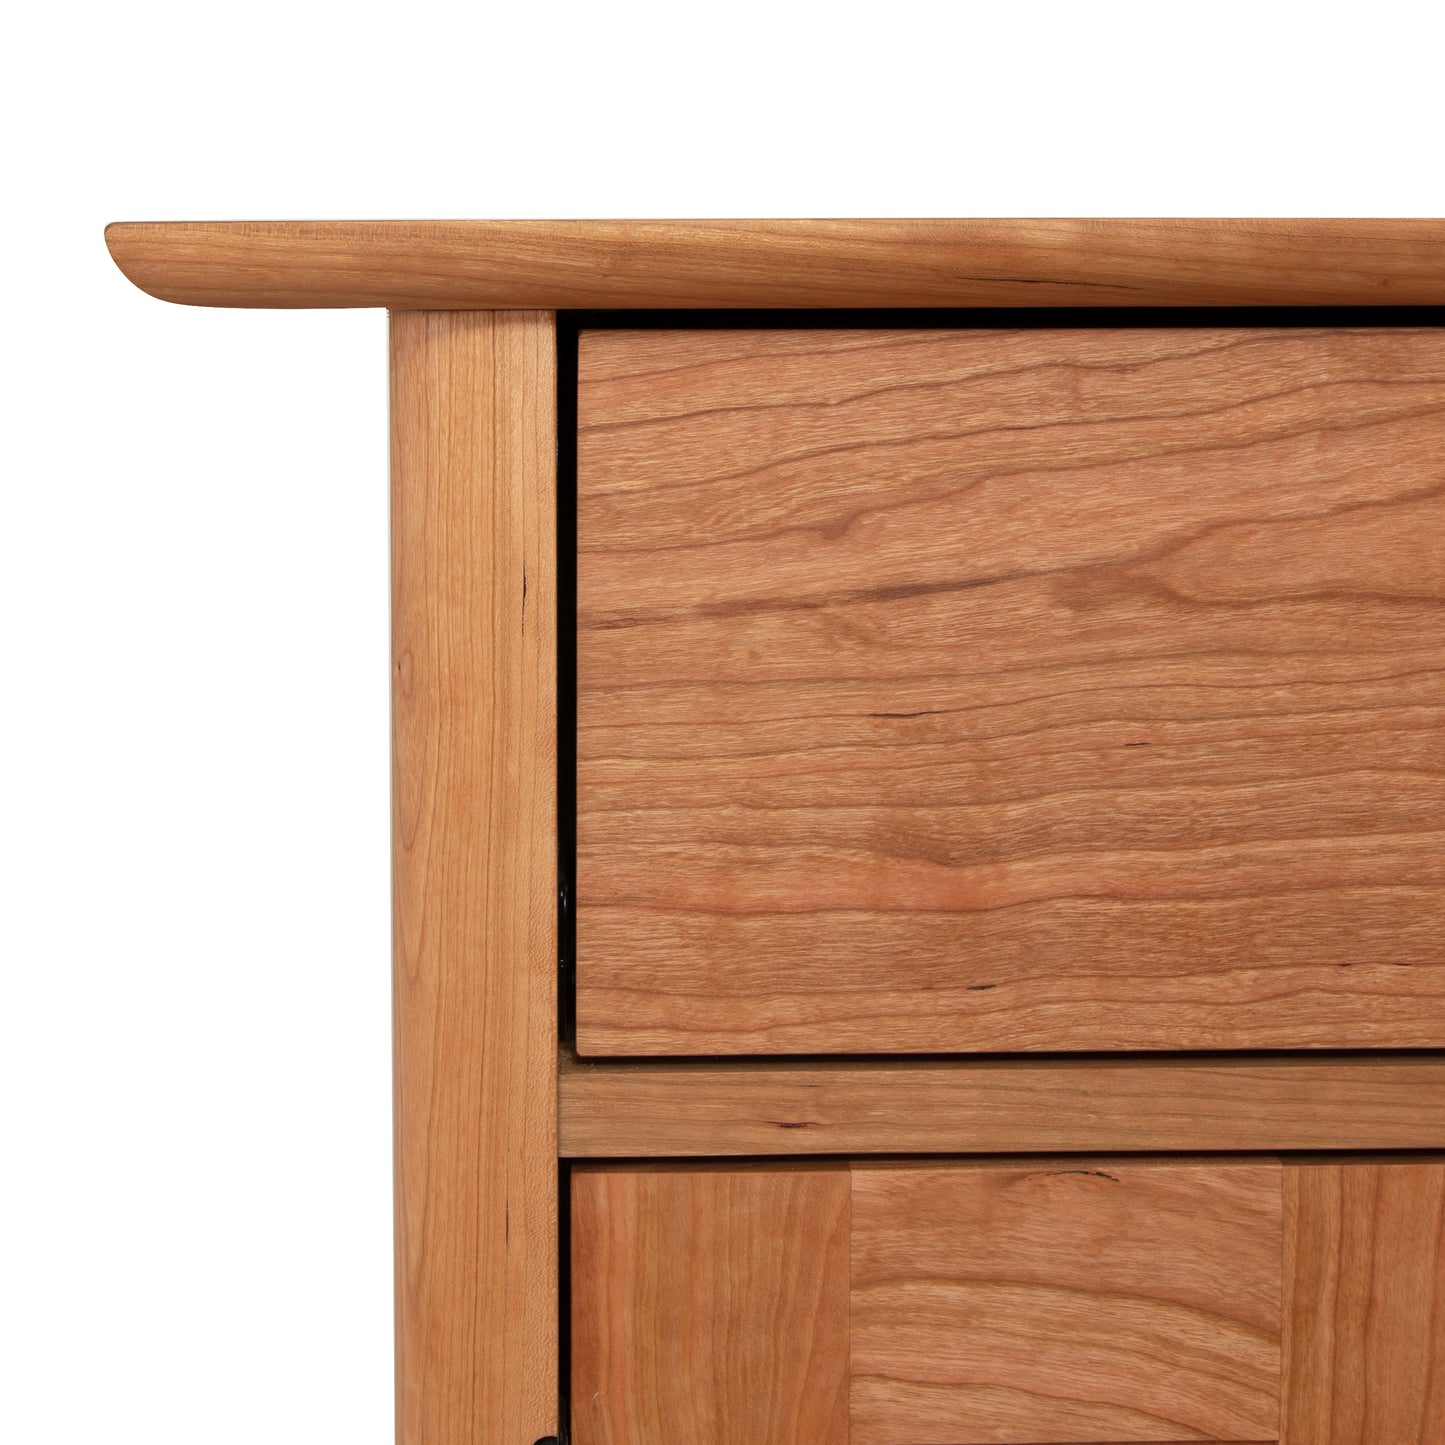 A close up of a Heartwood Shaker Short Storage Chest by Vermont Furniture Designs.